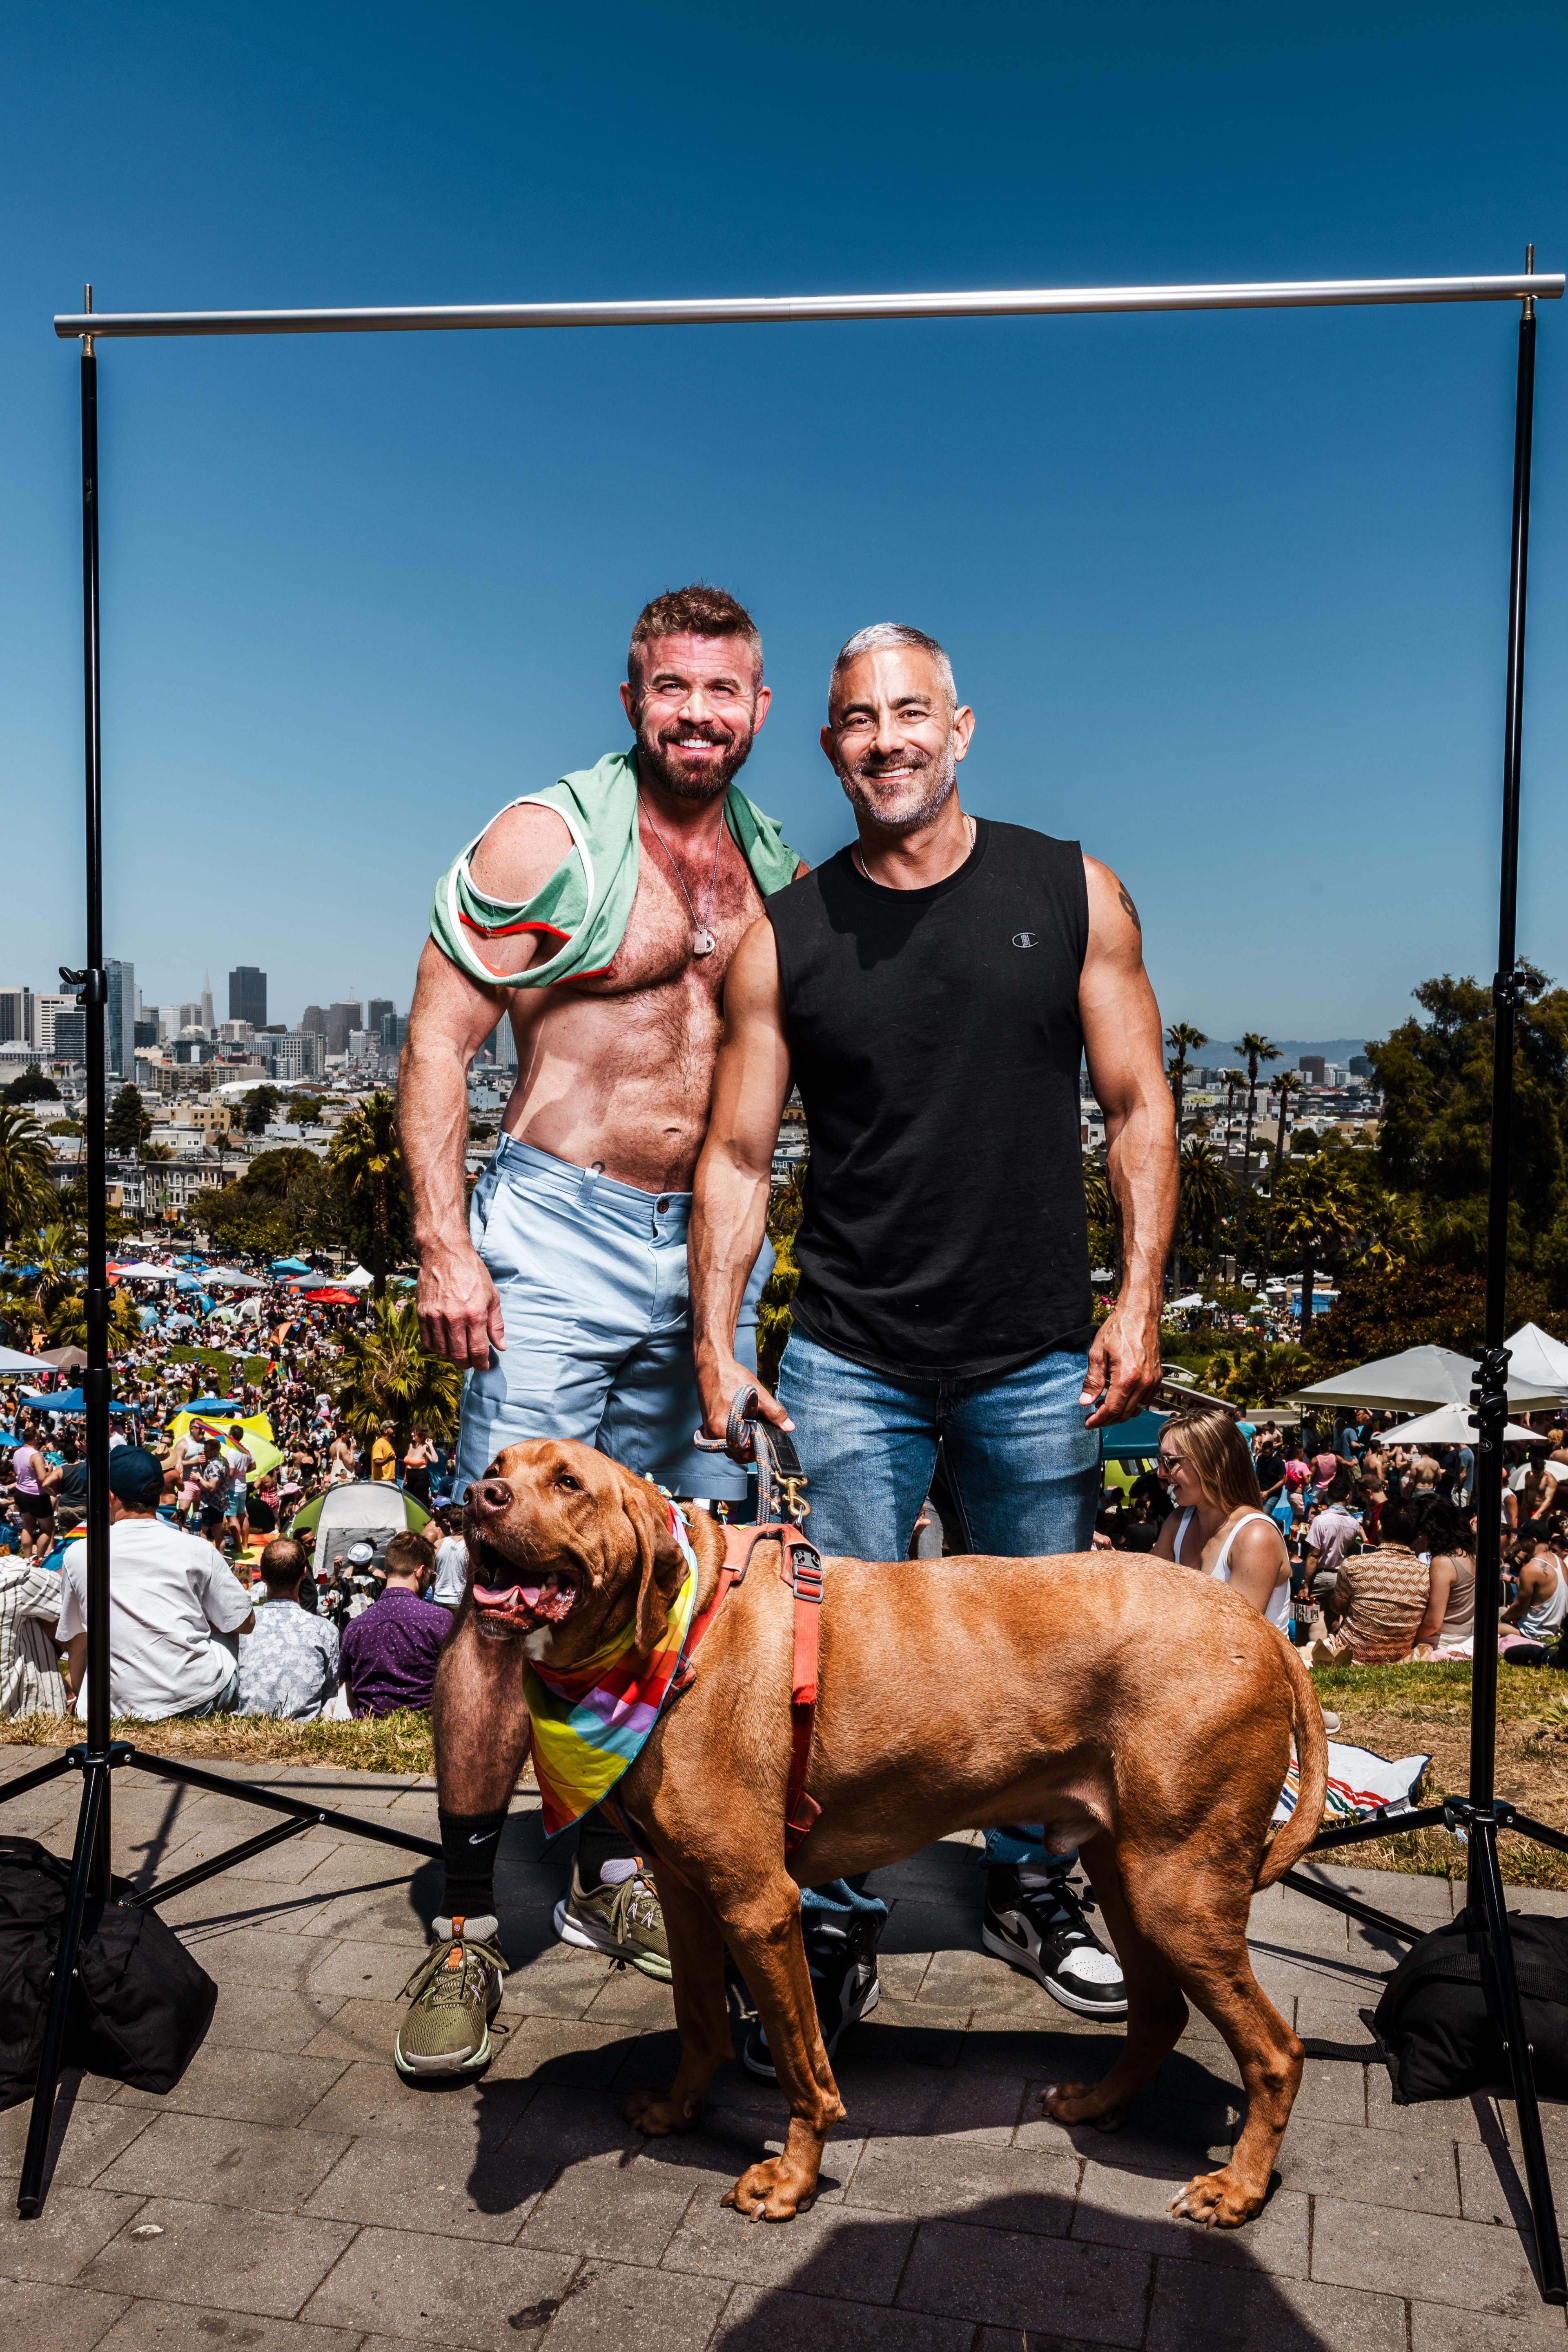 Two men stand smiling with a large dog wearing a rainbow bandana in front of a crowded park with city buildings in the background under a clear blue sky.